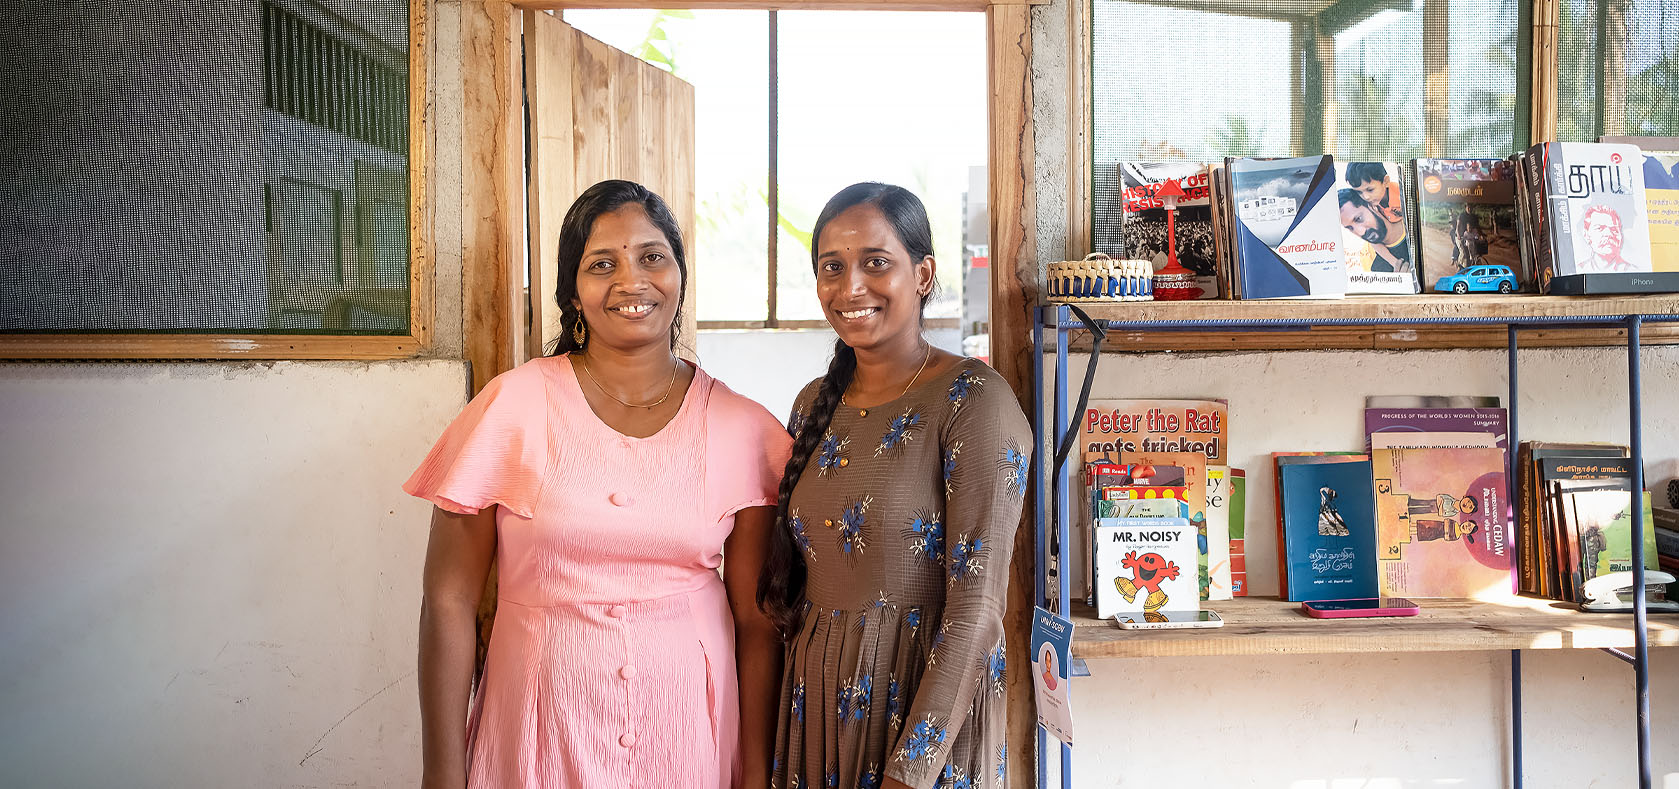 Jena (left) with her co-worker who helps run Good Life Products, pictured in Uppukulam, Mannar in Sri Lanka’s Northern province on 14 March 2023. Photo: UN Women Sri Lanka/Ruvin De Silva